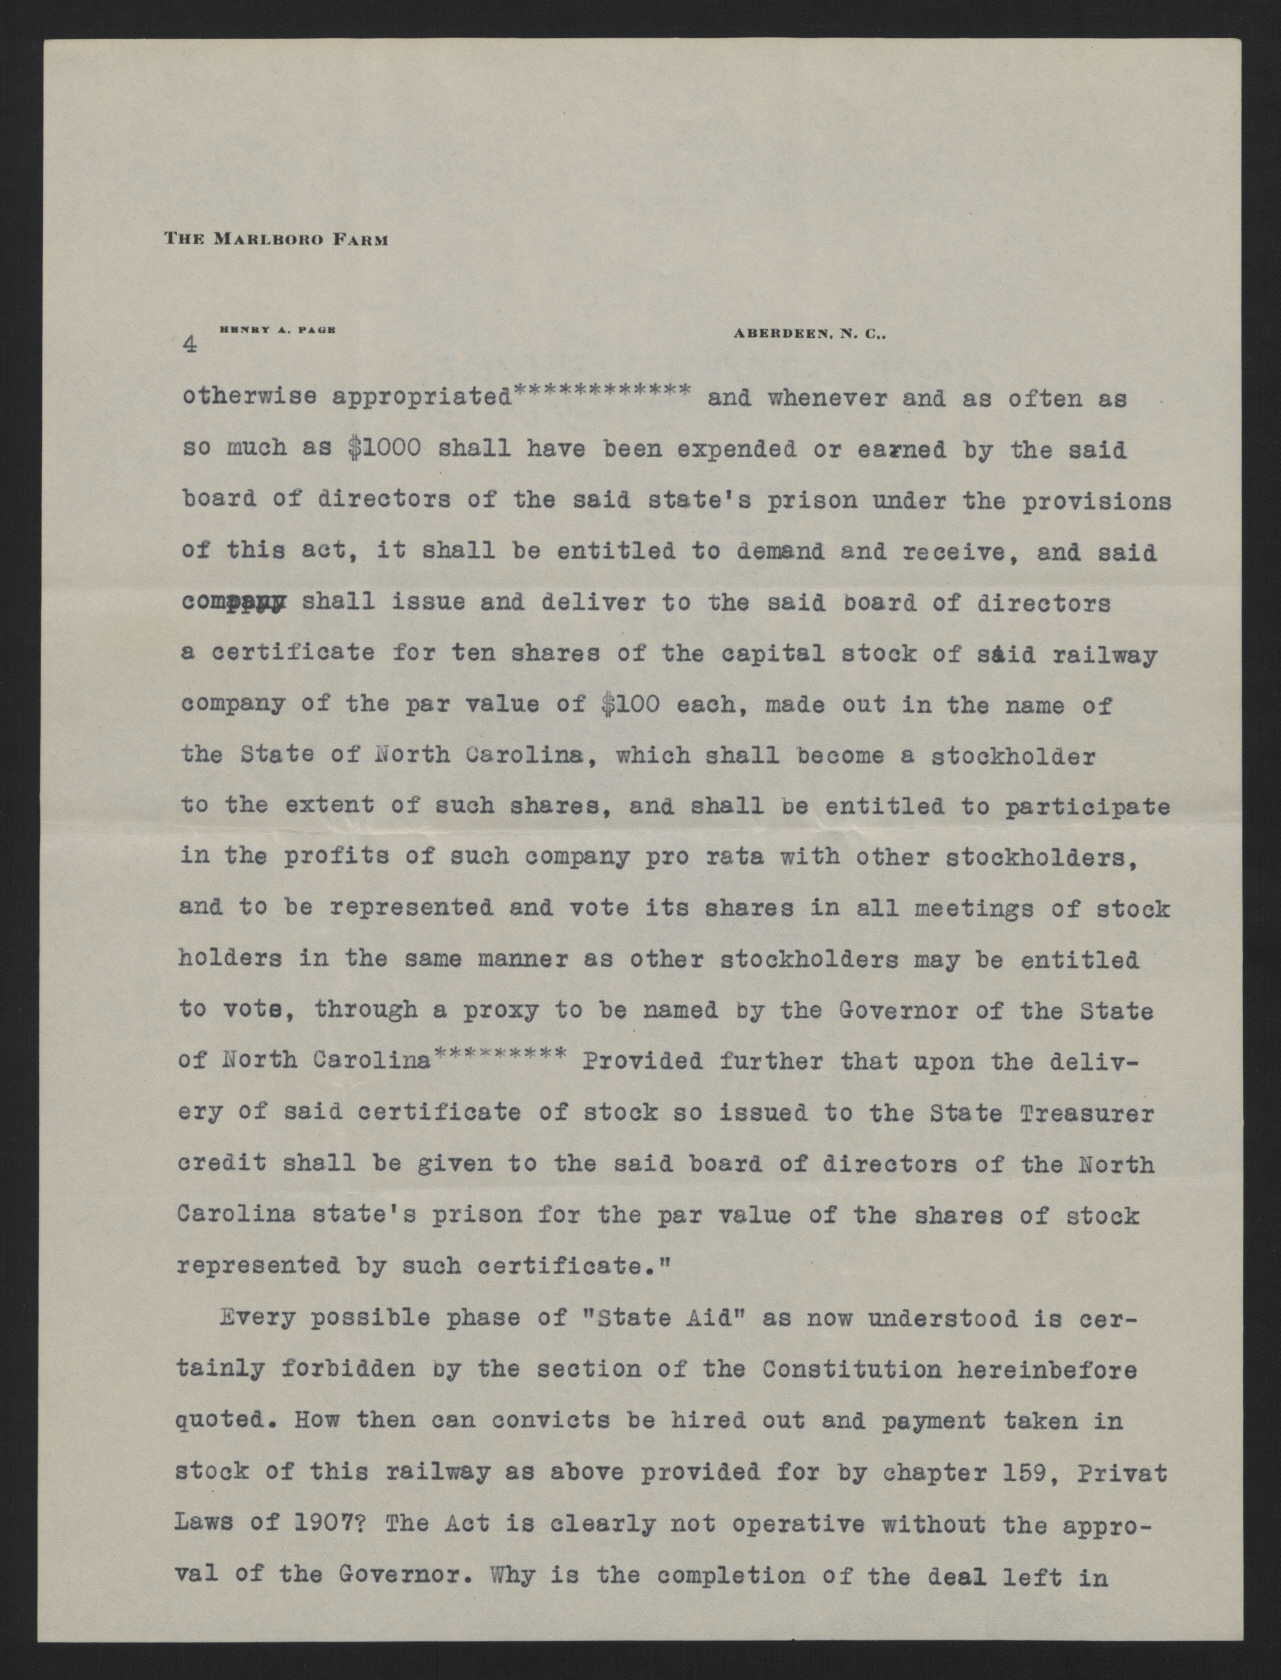 Letter from Page to Craig, February 8, 1915, page 4